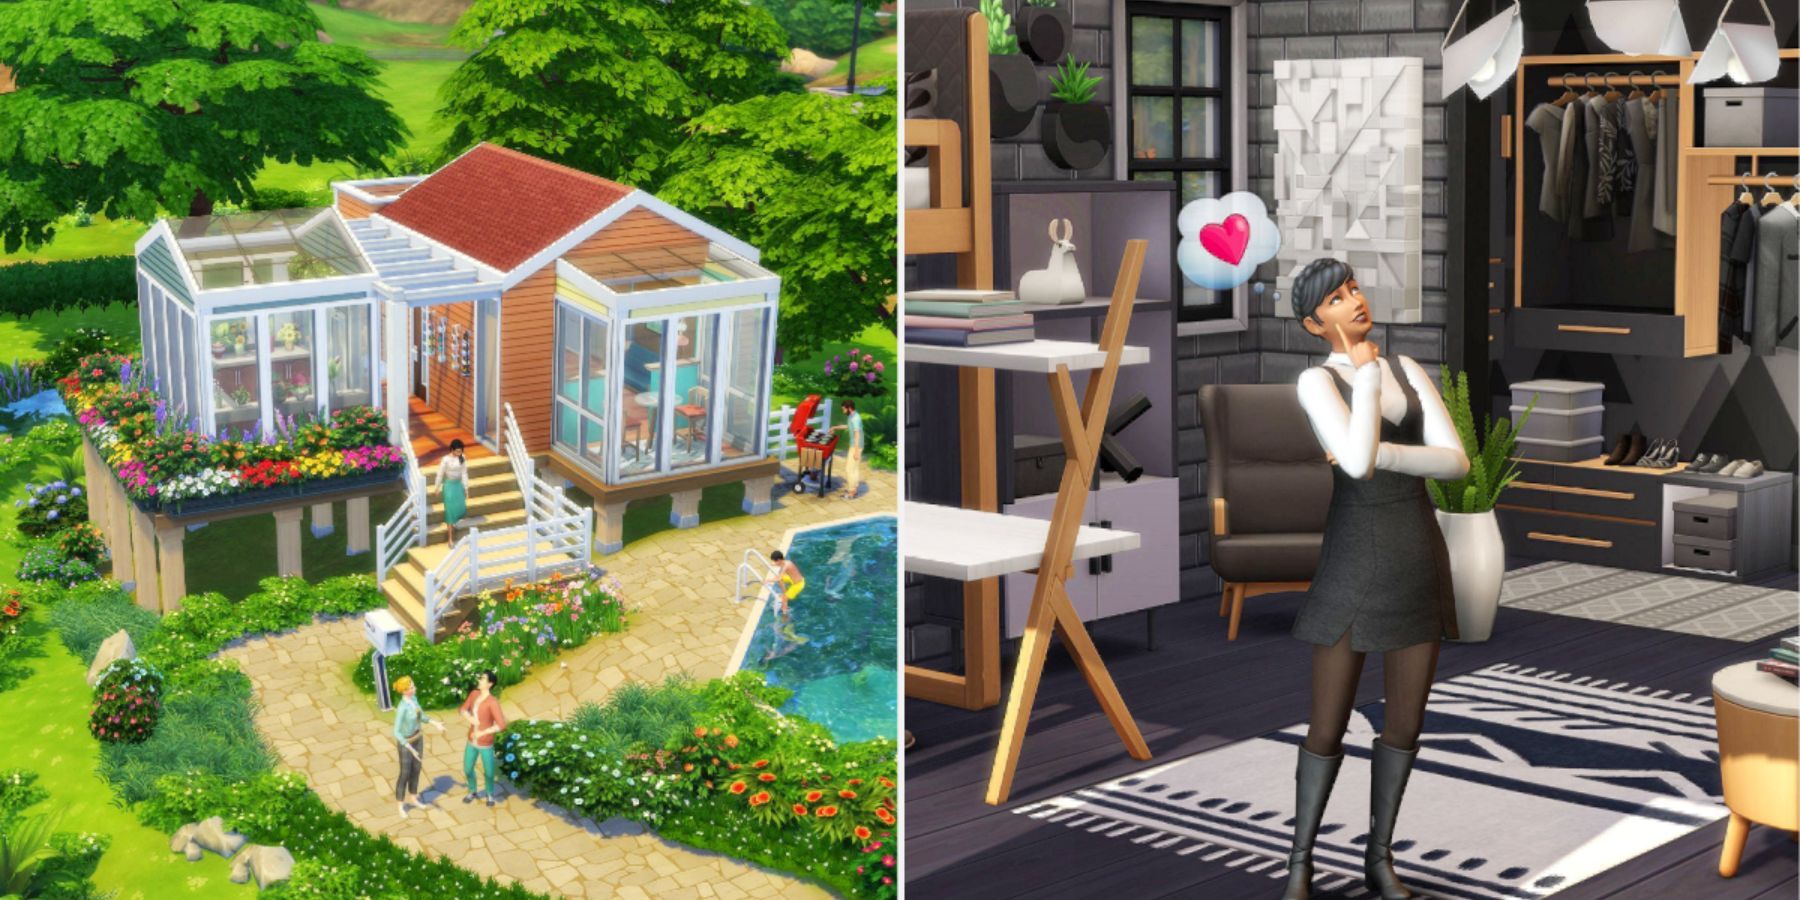 The Sims 4 Building: Using Build Mode Cheats